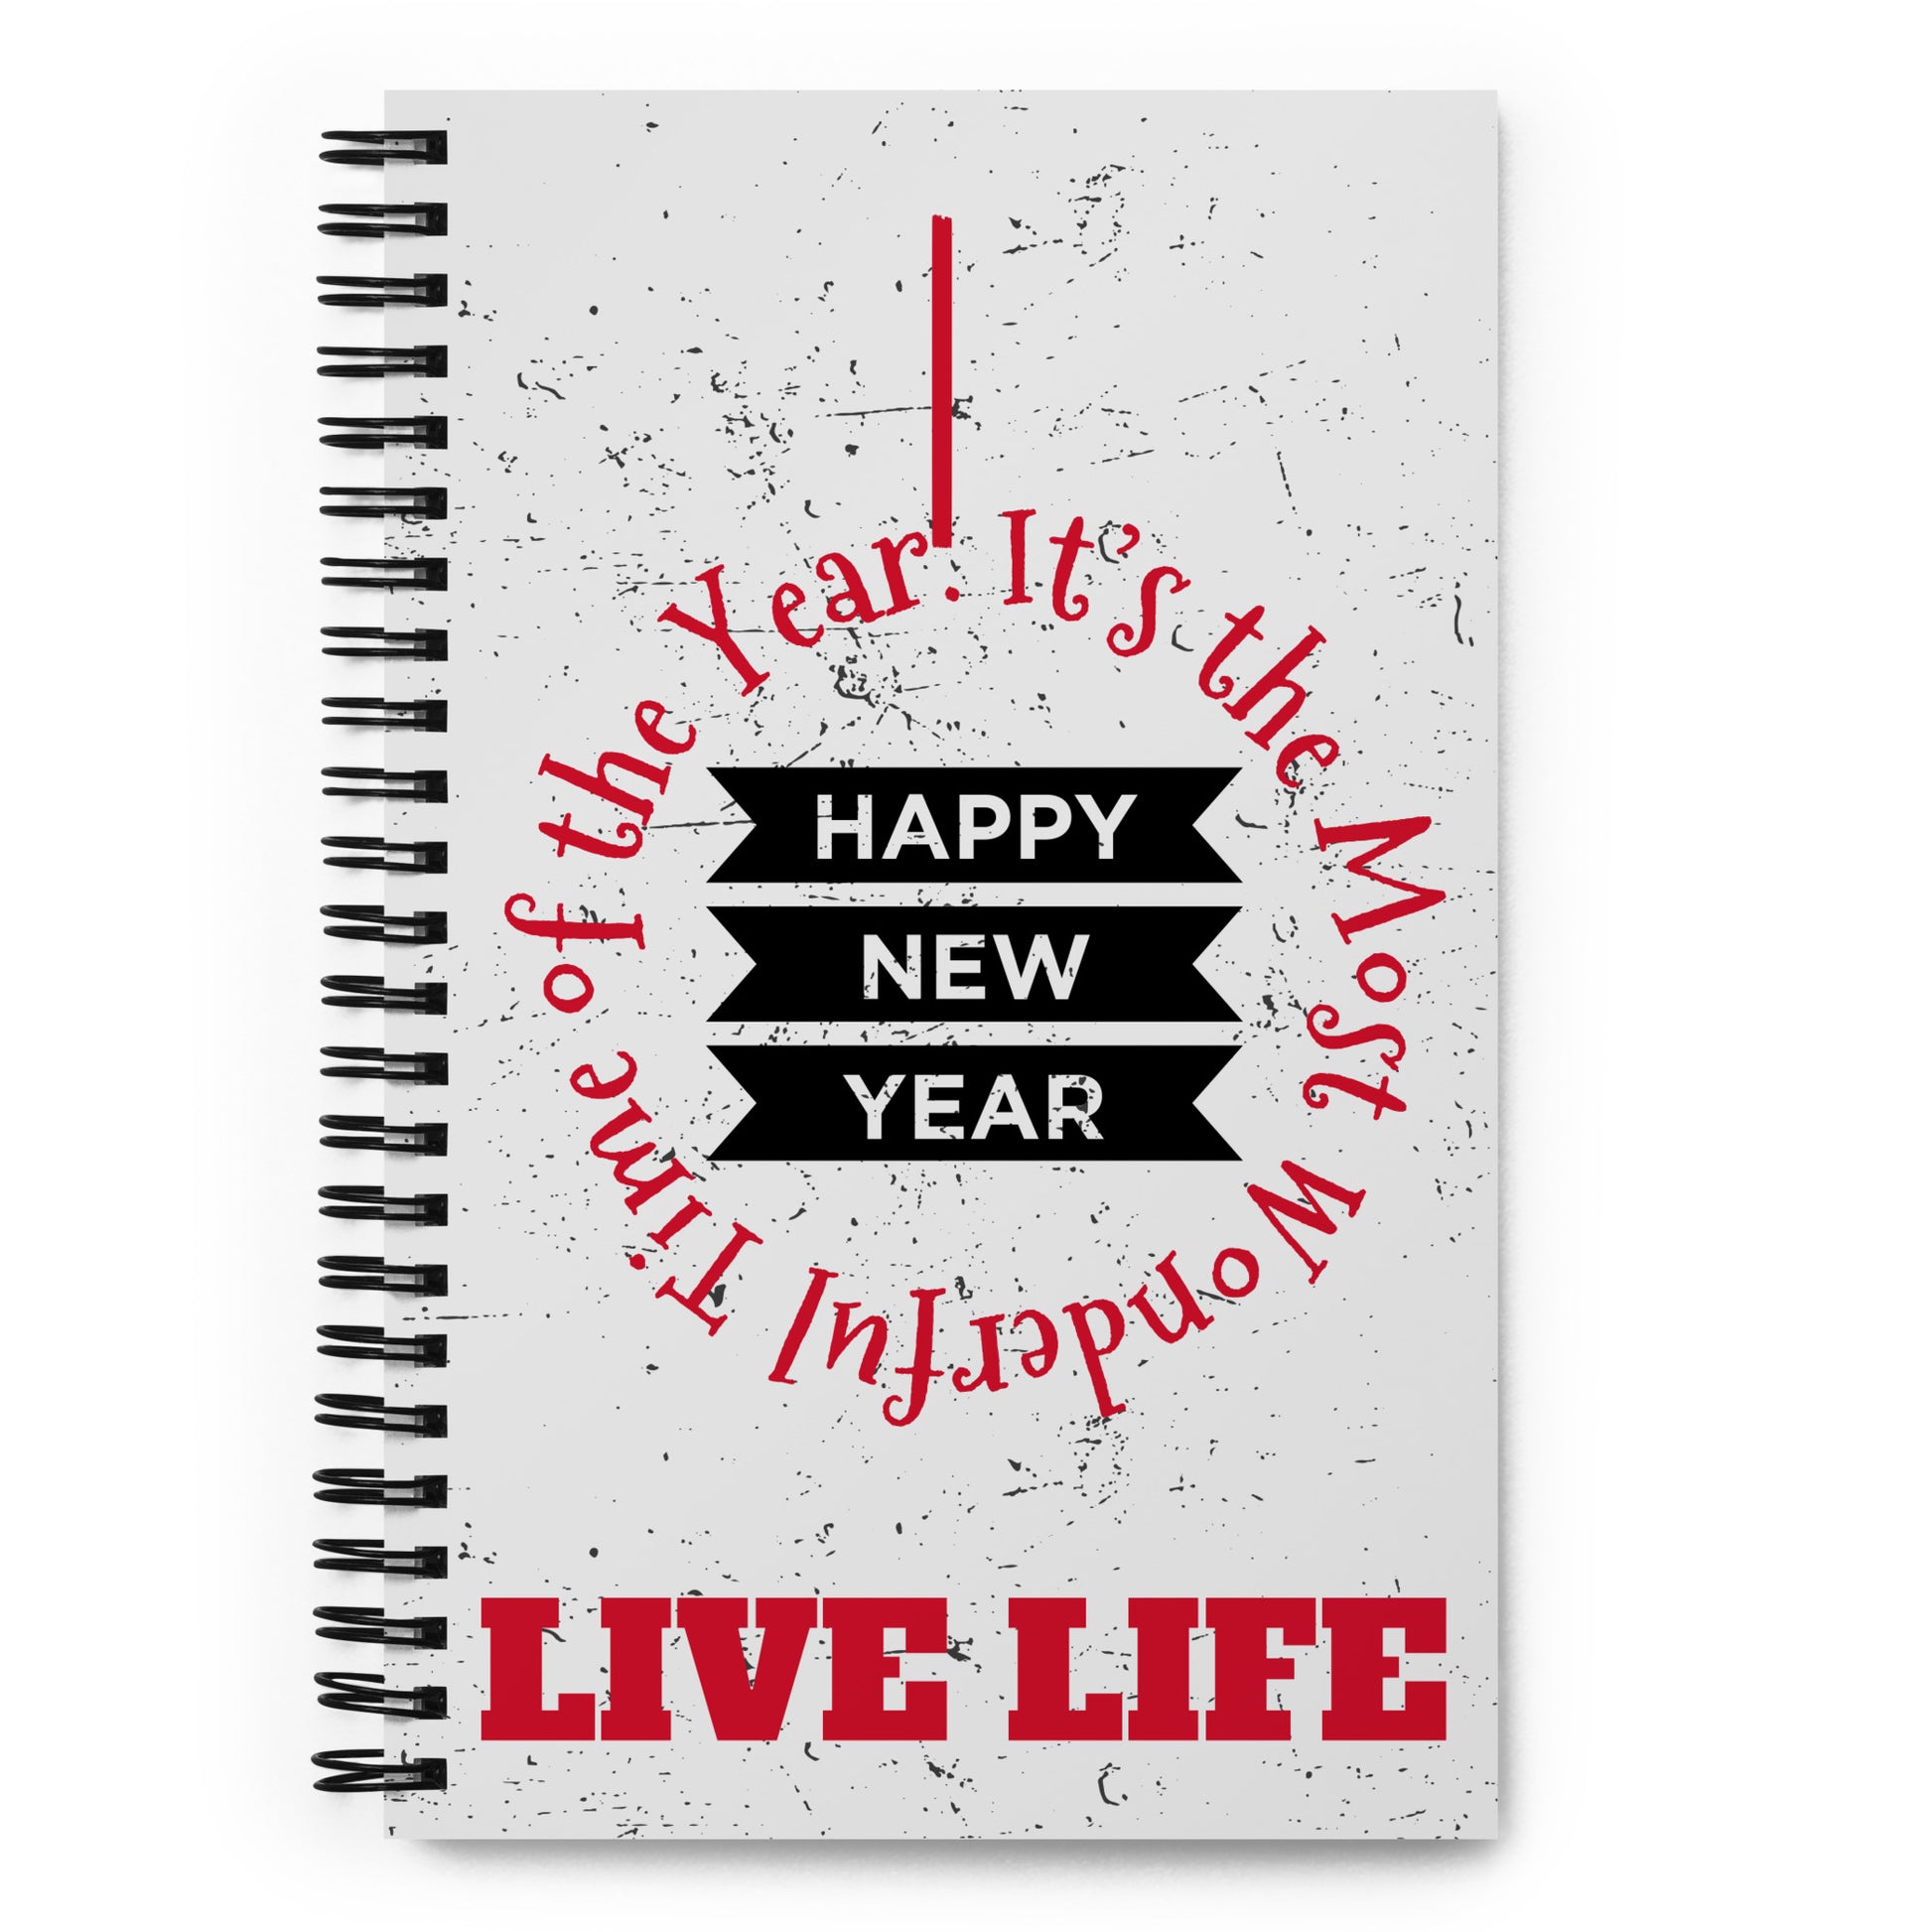 Metal wire-o binding/spiral diary/notepad/notebook. Gray-white cover with gray-black speckles, front view. Wise quotes/mantras/mottos/sayings/taglines. "It's the Most Wonderful Time of the Year," "Live Life," (red) and "Happy New Year" (black and white.) 140 dotted pages. 5.5 inches x 8.5 inches. Shown in the hands of a model wearing blue jeans. Jamilliah's Wisdom Is Timeless Shop - wisdomistimeless.com.